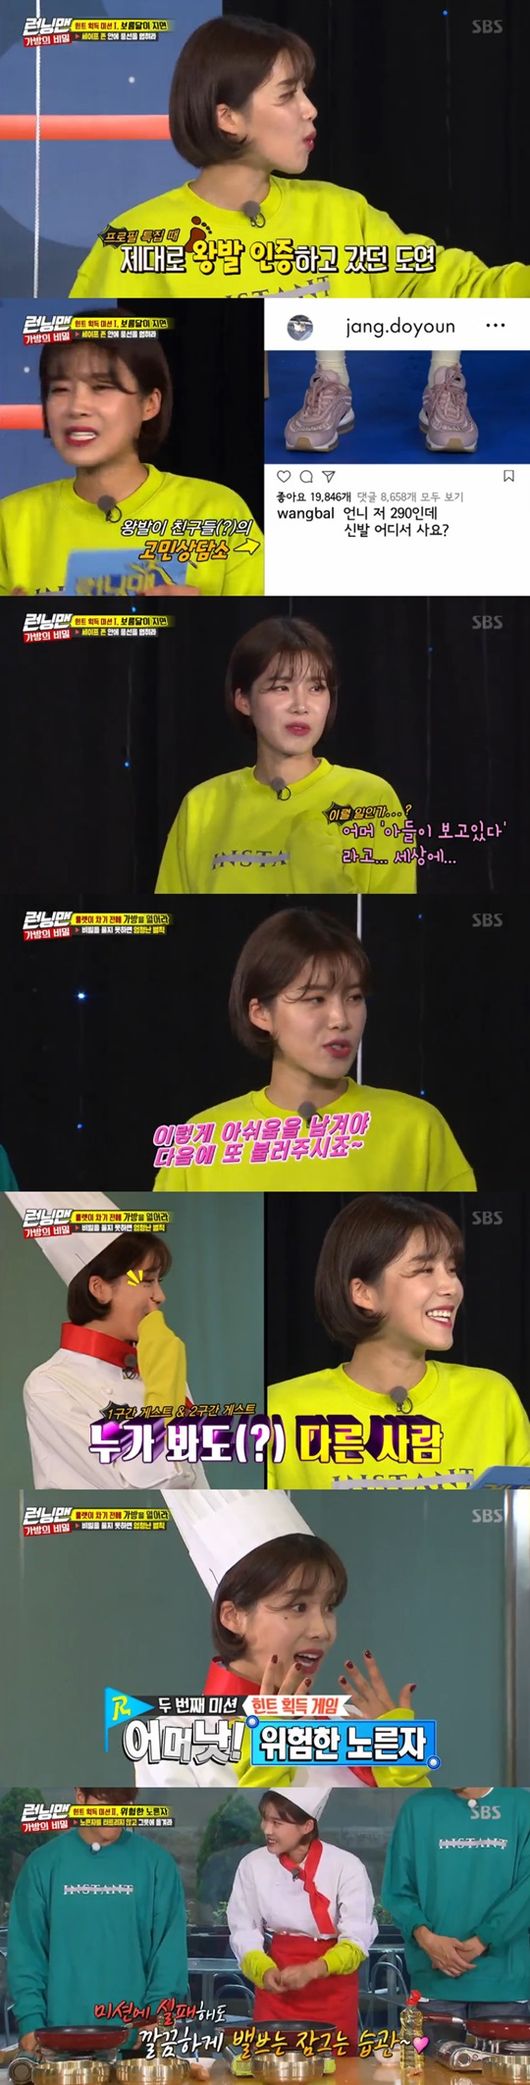 Jang Do-yeon, a broadcaster who played MC in Running Man, received praise from National MC Yoo Jae-seok.In the SBS entertainment program Running Man broadcasted on the afternoon of the 23rd, a struggle race was drawn to solve the secret of the bag.On this day, Jang Do-yeon appeared as a back girl. The members welcomed Jang Do-yeon, saying, Jang Do-bal is coming.Yoo Jae-seok asked, I do not have a day off these days. Jang Do-yeon said, There are many things to do, but it is a reward for the entertainment industry that comes out here and there without a masterpiece.Then I am waiting for someone to pick it up. Jang Do-yeon said, You can go back and forth like that and soak your feet well in a pRace that seems okay.Yoo Jae-seok said, How about Running Man? He said, I tried a lot before that, but I do not think there is a pRace for me, and it seems better to fall out when I forget.Yang Seon-chan, who is close to Jang Do-yeon, laughed and admired, saying, My sister is quick to notice.Jang Do-yeon, who had previously certified the head of the company in Running Man, said, At that time, after certifying the head of the head, the message is poured to the friends.I am 290, but there are a lot of messages from where I live to the kings fighting. Jang Do-yeon was nicknamed Jang Cham for his 90s progress. Jang Do-yeon also made a ridiculous comment to his seniors such as Ji Seok-jin and Yoo Jae-seok, making him the center of laughter.Looking at his progress, which seemed to be somewhere but was full of excitement, Haha said, I like the progress so much.After the first round, Jang Do-yeon greeted the members, saying, I have been going to this pRace.However, he returned from the second round with a dot under his eyes and introduced himself as Bigfoot chef and reappeared and made the members laugh.Jang Do-yeon failed to meet the expectations of the members who wanted to write Jang Do-yeon Chance and failed to perform the mission, but he was able to avoid the members sighs by saying it is a habit of locking the valve neatly.In the third and fourth rounds, Jang Do-yeon was also with the members of Running Man. Jang Do-yeon was good at falling and falling according to his strengths.In particular, Jang Do-yeon, who succeeded in parking the mini-car as expected by the members who wrote the 4th round Jang Do-yeon Chance, caught both fun and activity.Yoo Jae-seok also admired Jang Do-yeons sensible progress.Jang Do-yeon, a member of Running Man, was the core of the laughter on the day. He hopes that Jang Do-yeon will keep his promise to come if he forgets.Running Man broadcast capture.